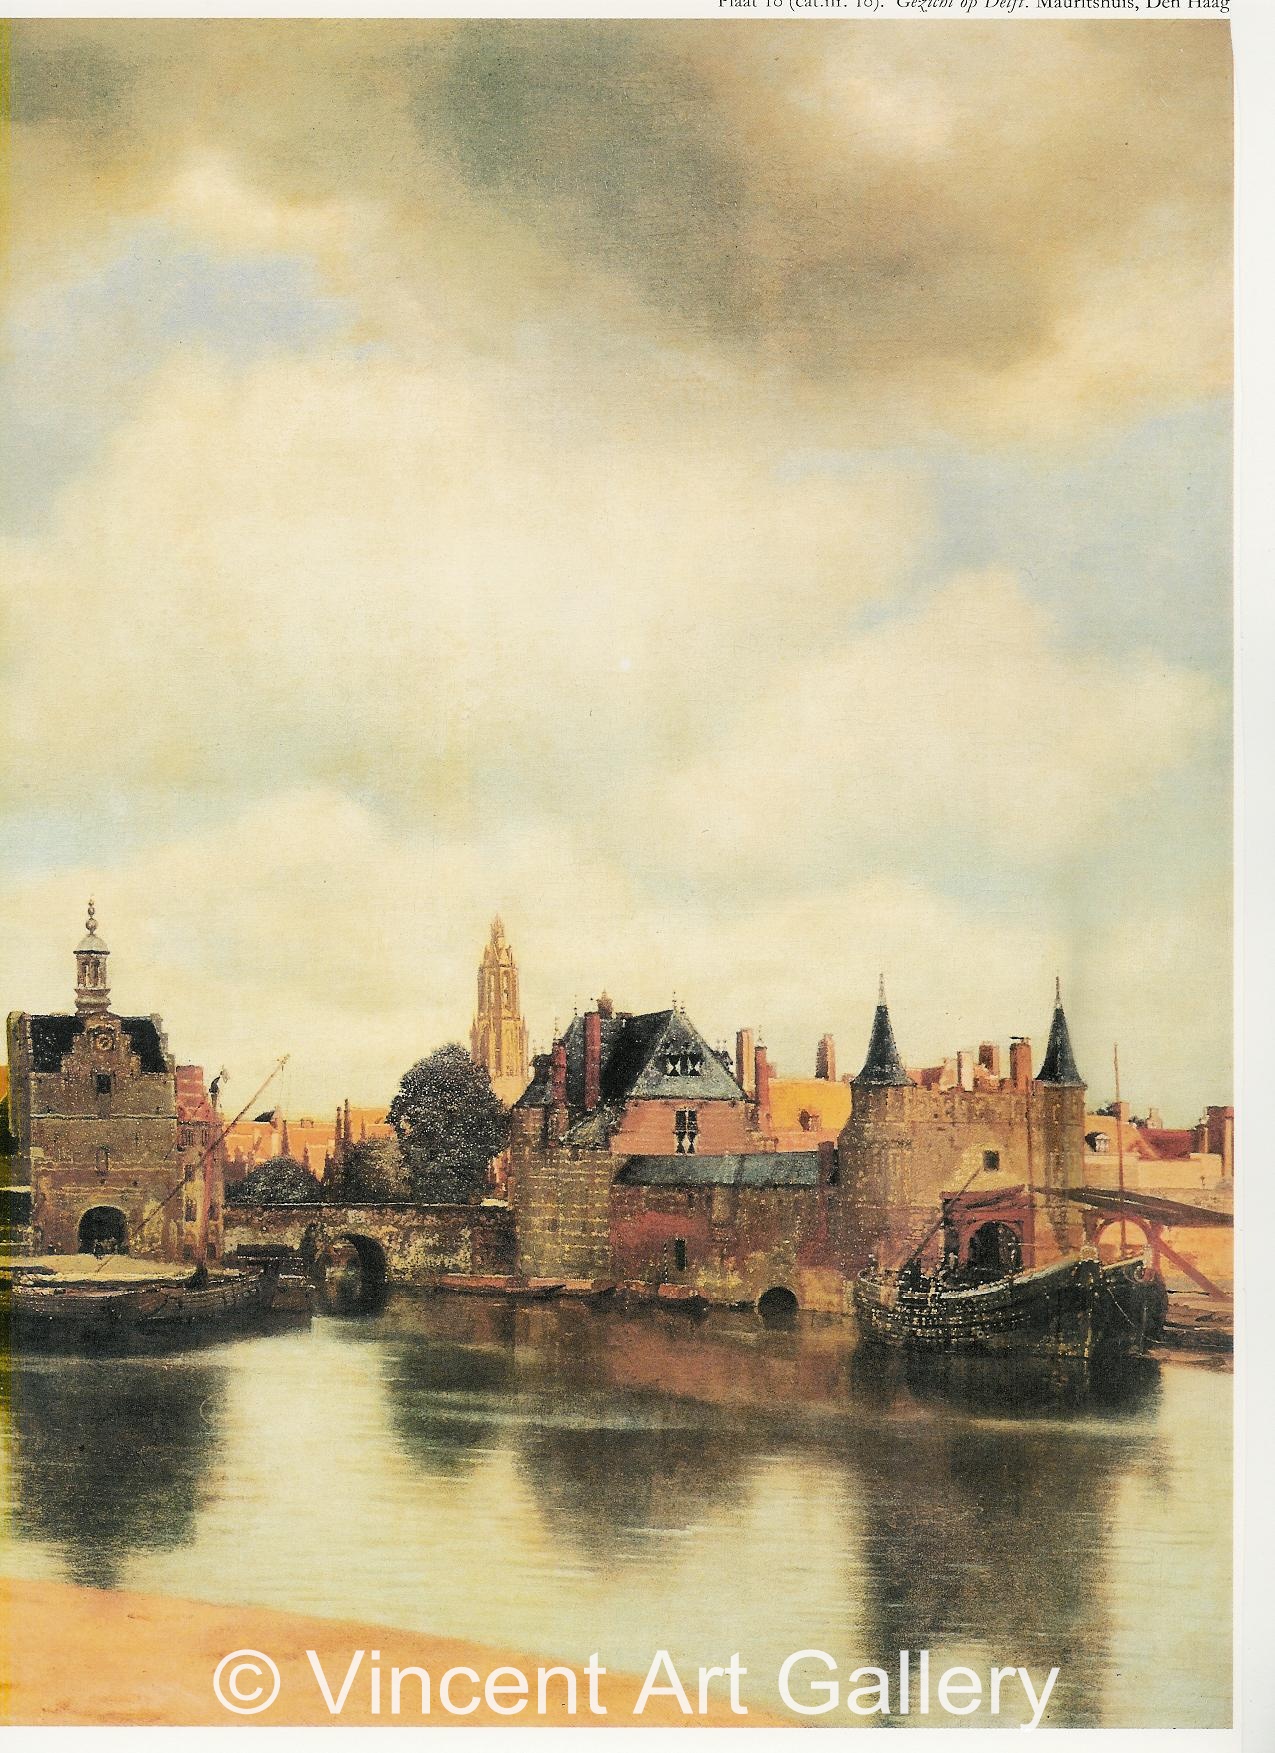 A635, VERMEER, View of Delft, DETAIL 1